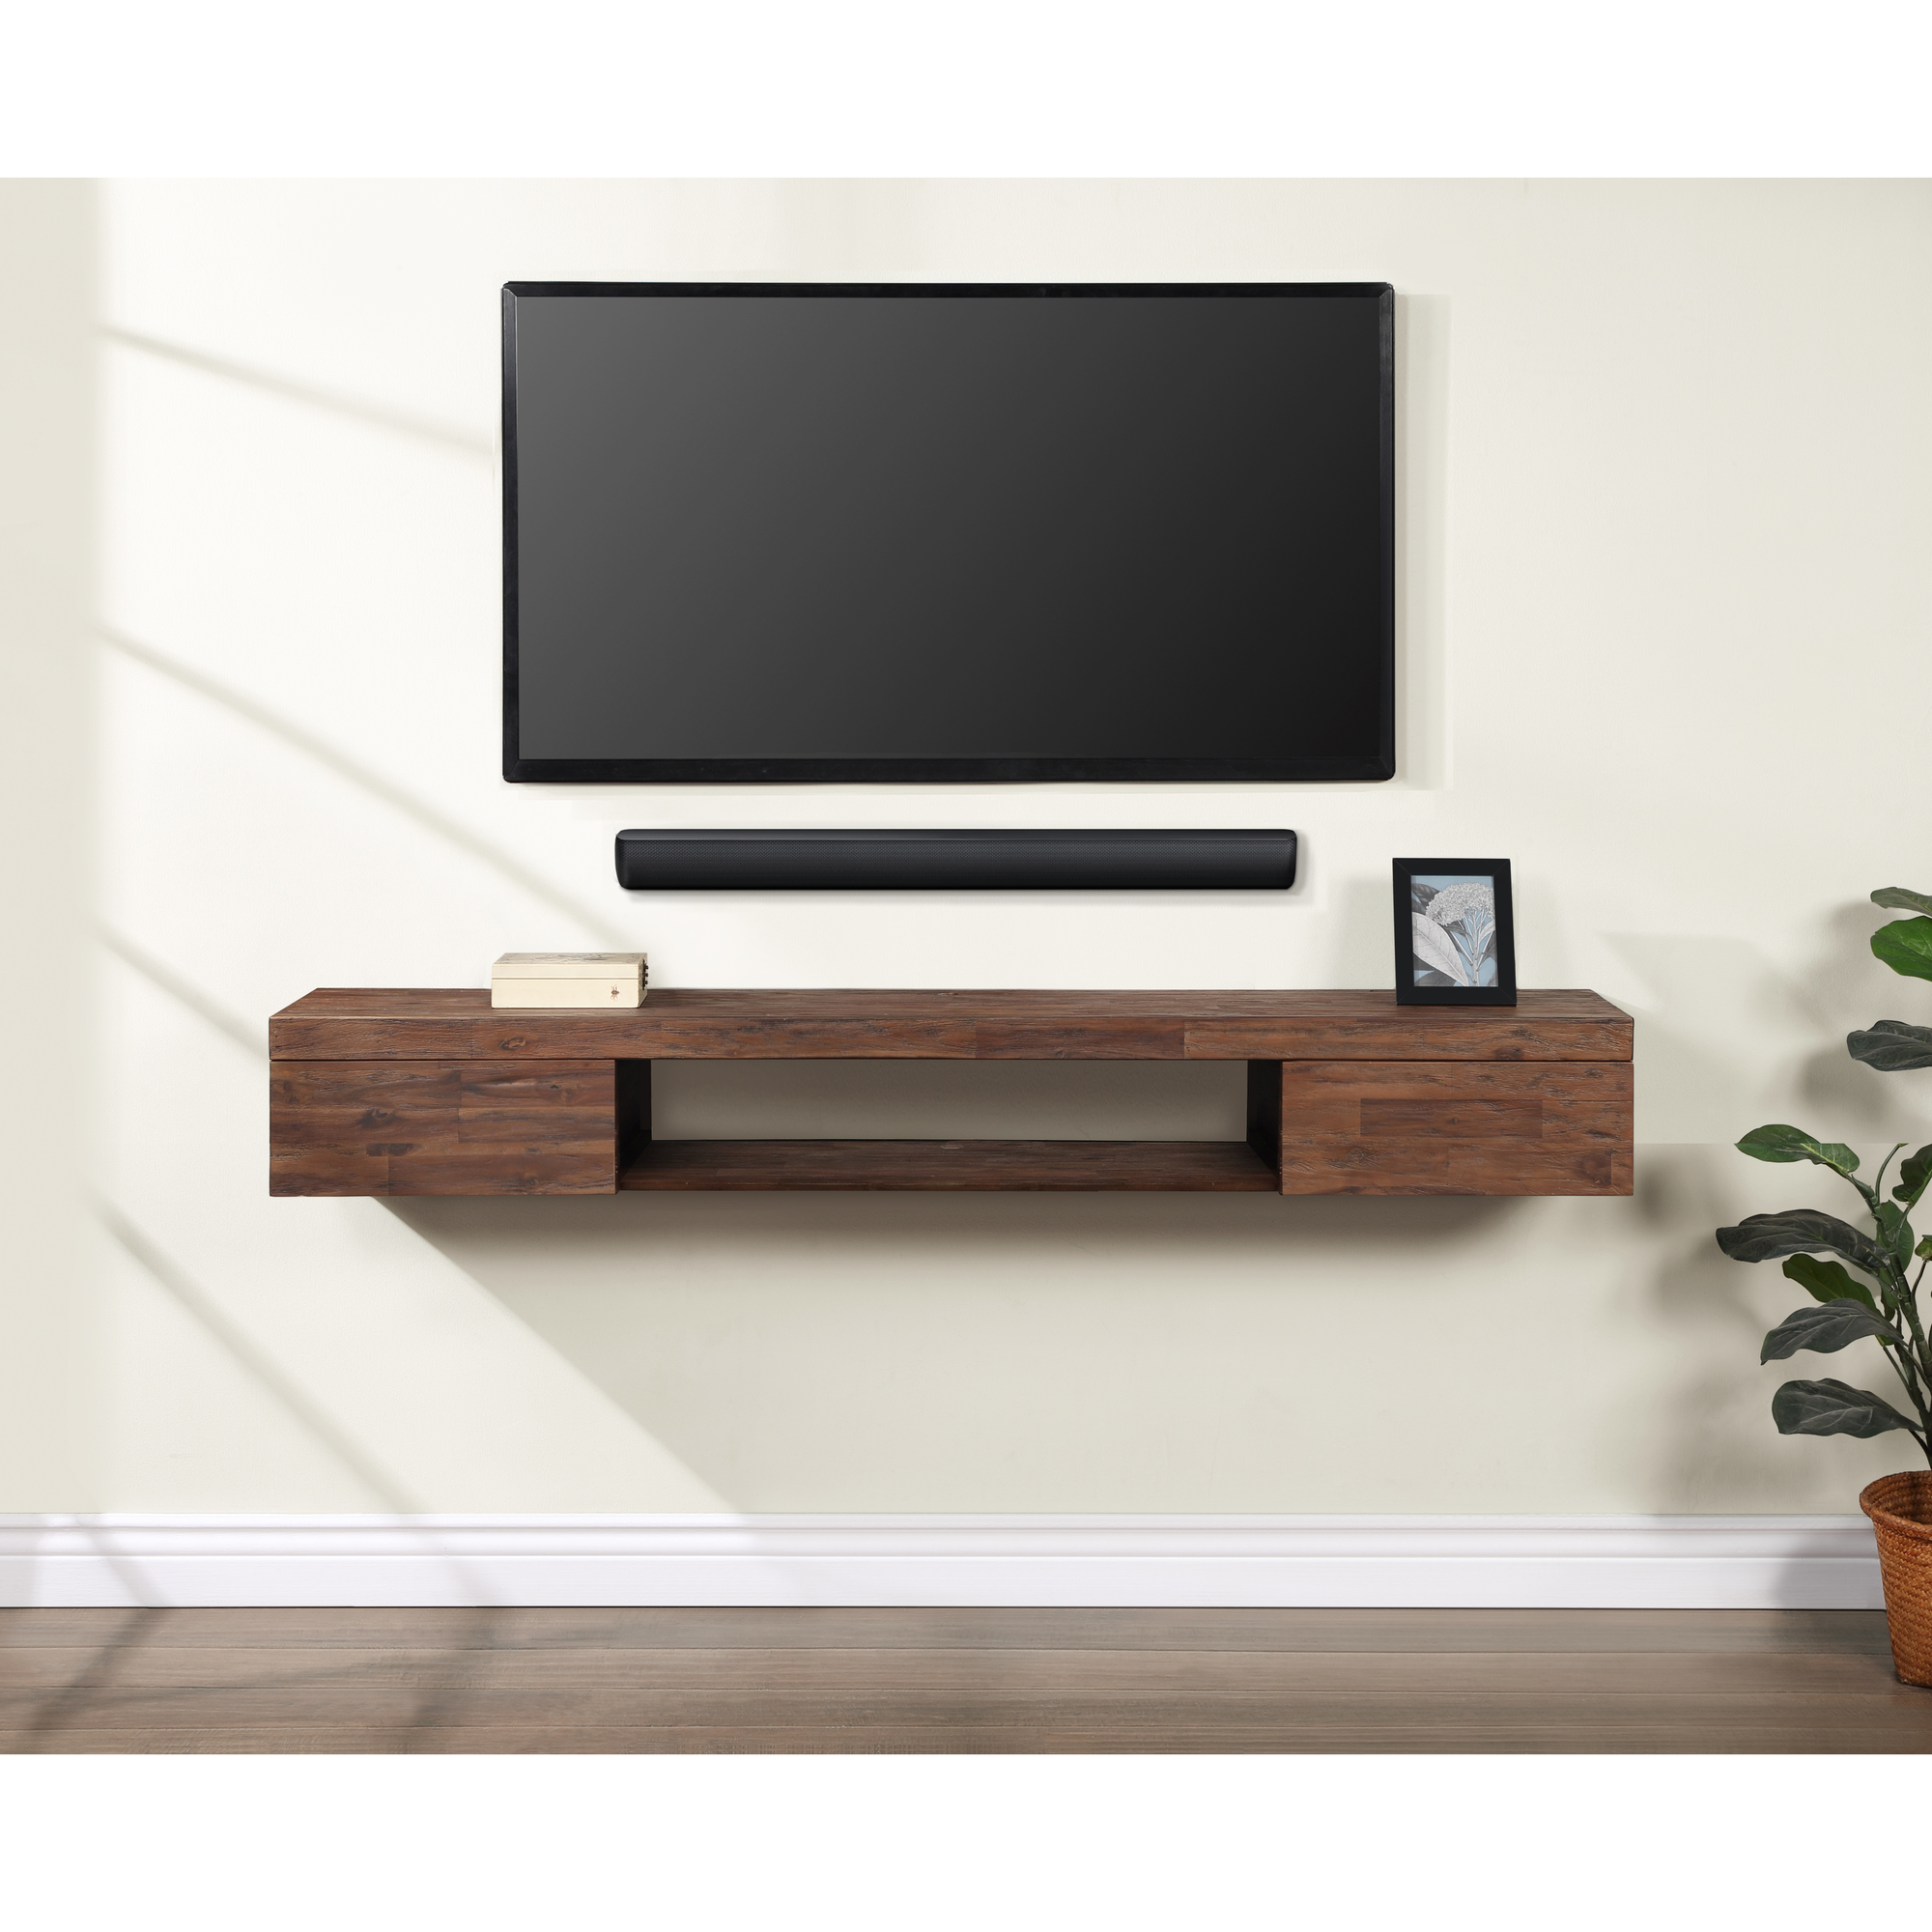 Merry Products, 71Inch floating distressed media console/ TV Stand, Width 71 in, Height 10.04 in, Depth 12.01 in, Model SLF0380115010